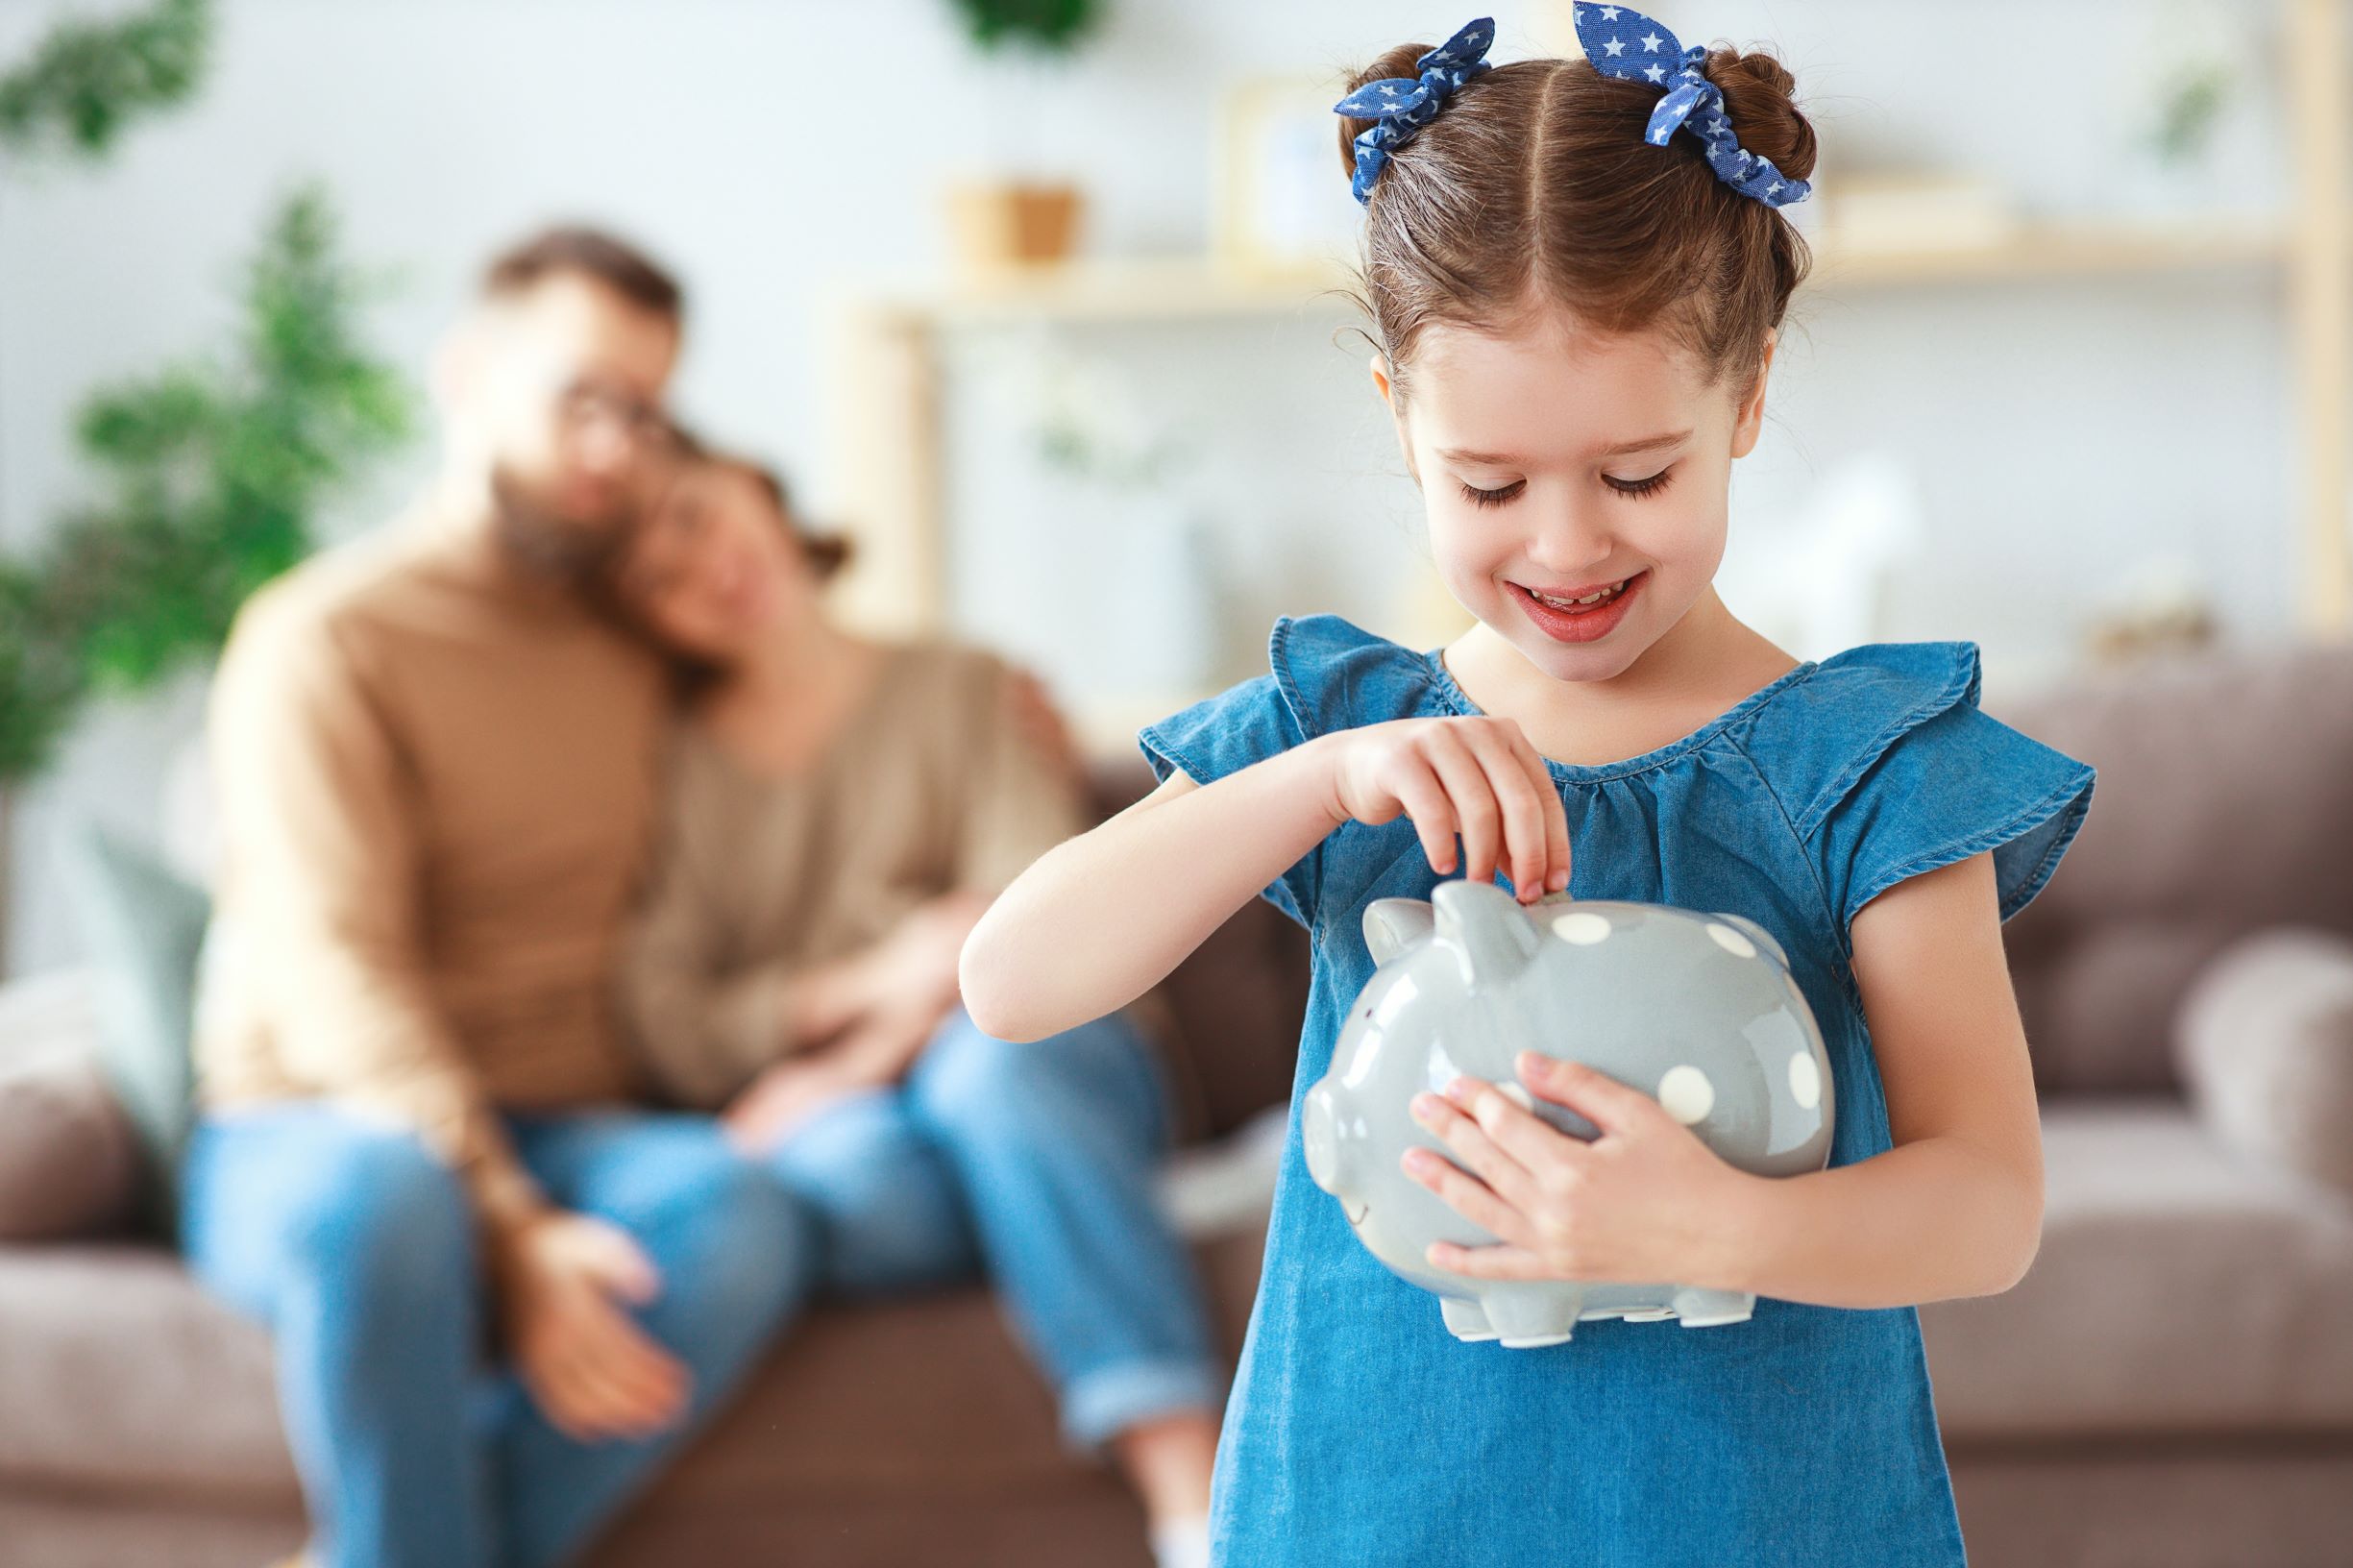 Child saving money while parents look on proudly